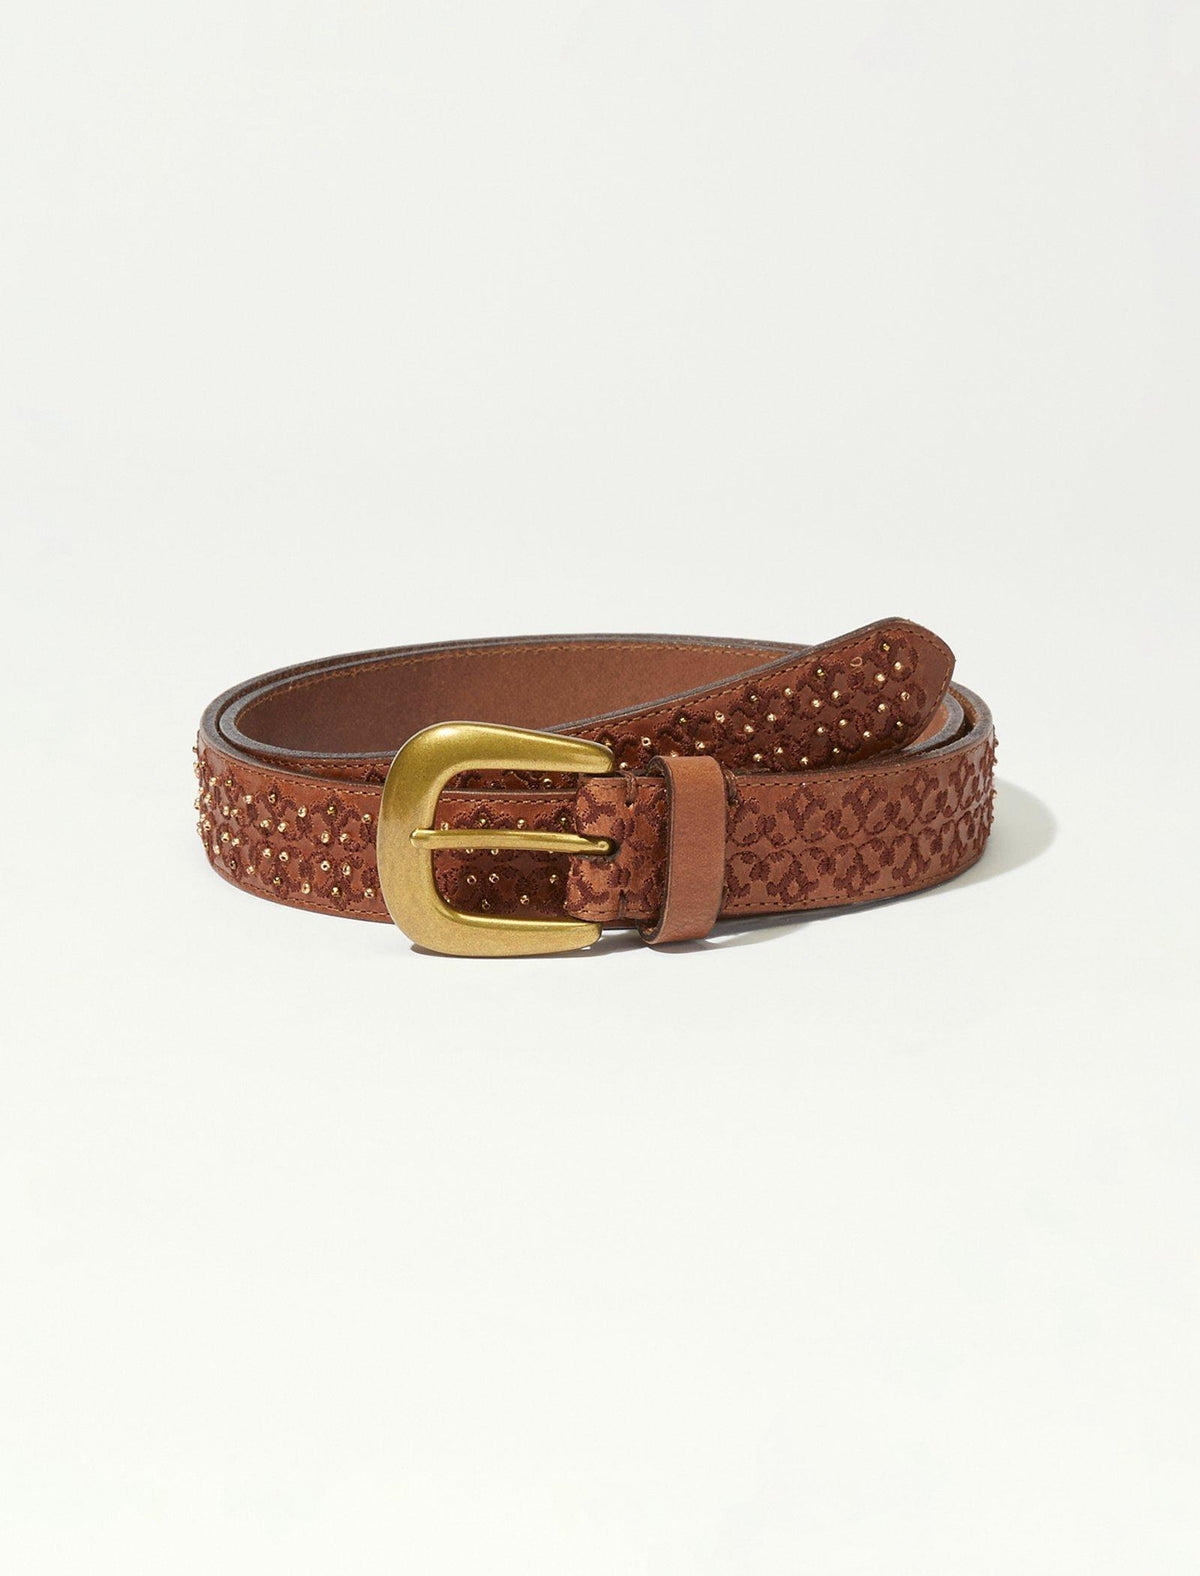 Lucky Brand Beaded And Embroidery Belt - Women's Accessories Belts Dark Brown